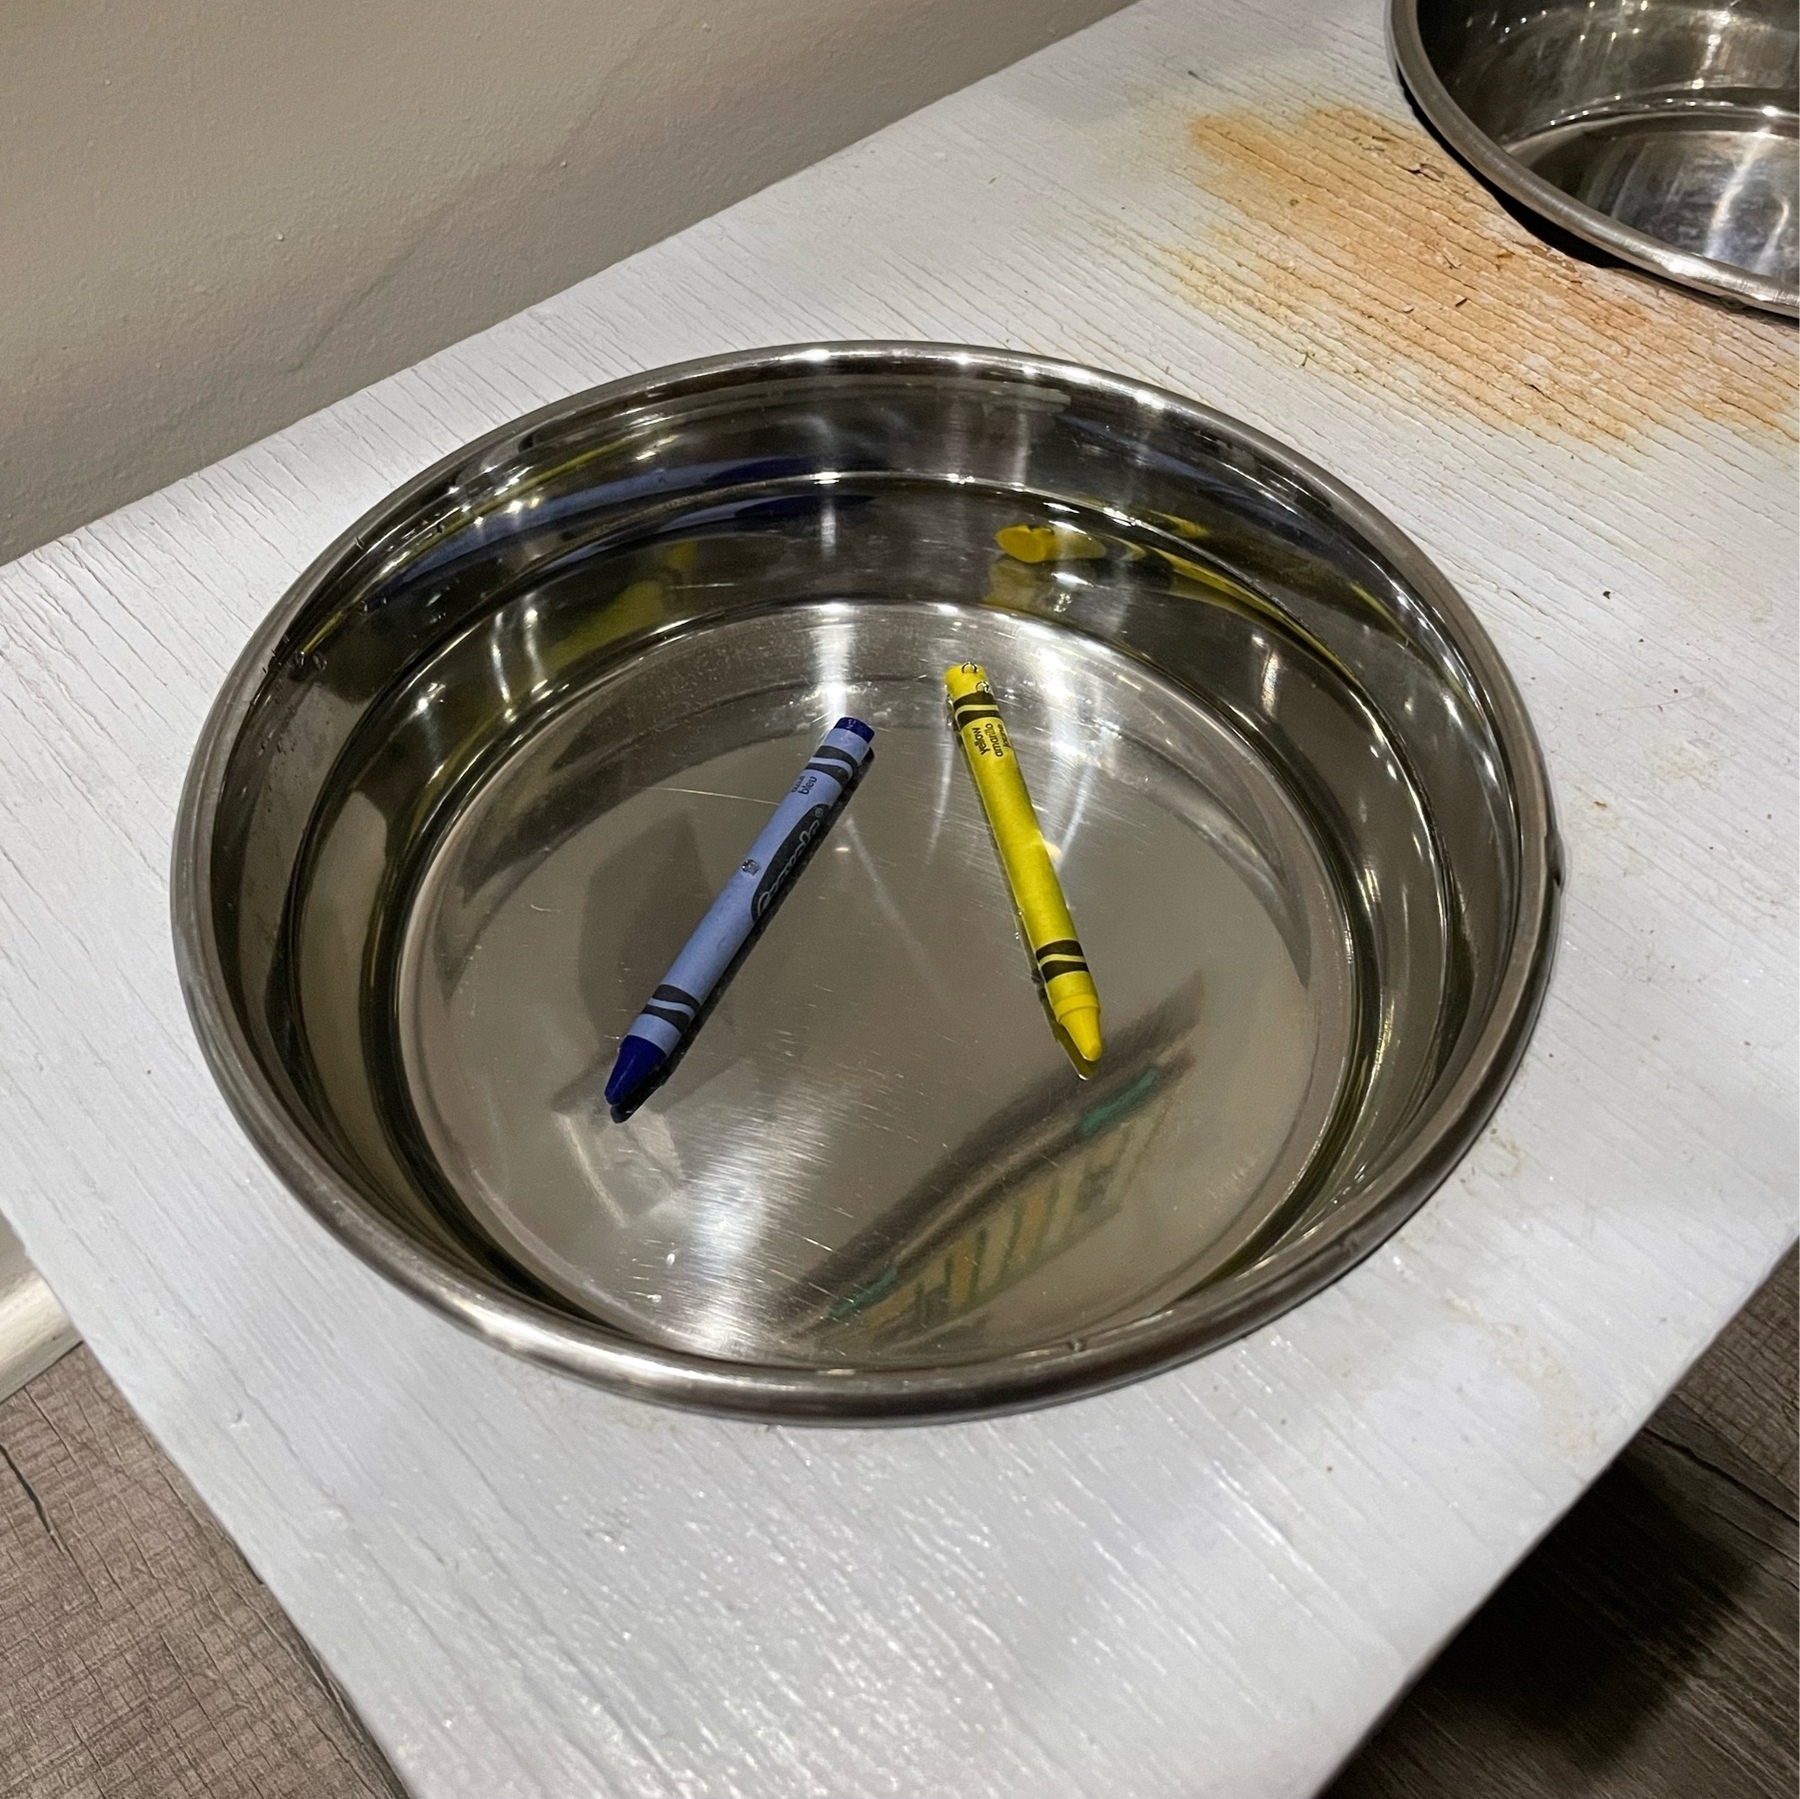 two crayons in a water dish